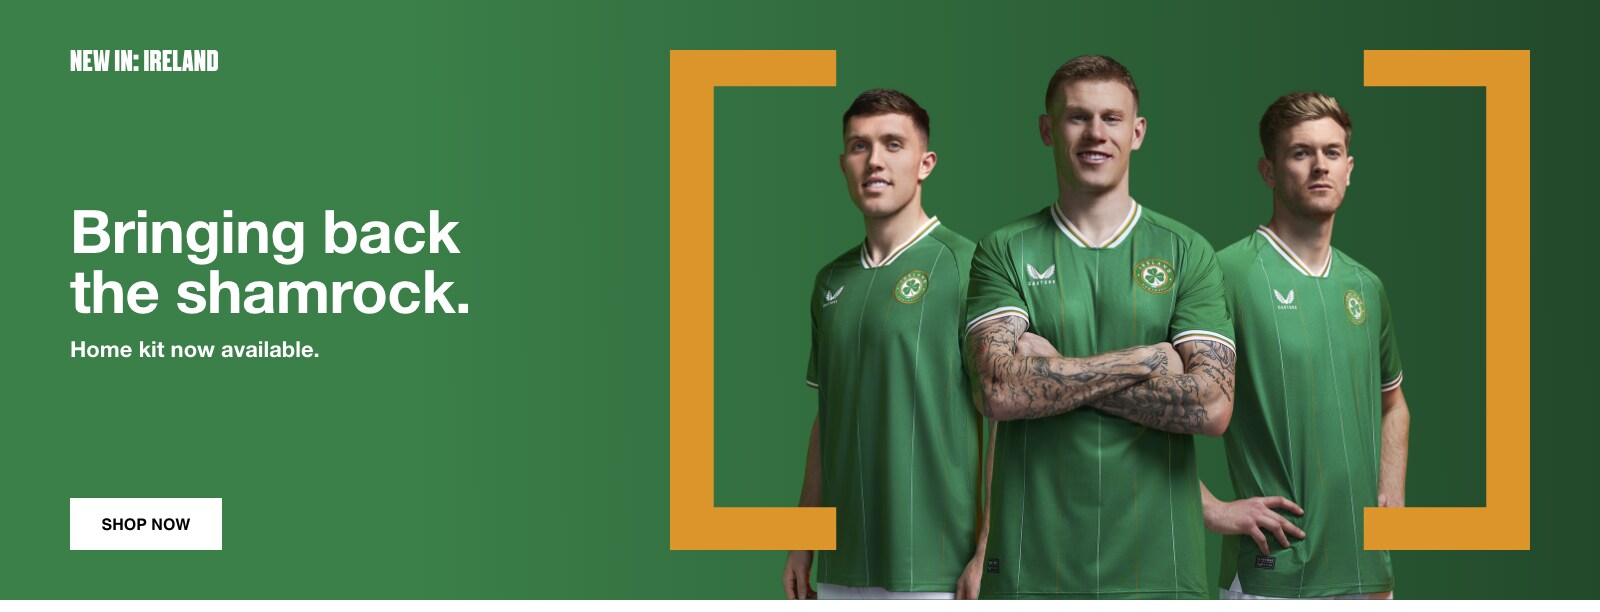 IRELAND HOME KIT NOW AVAILABLE